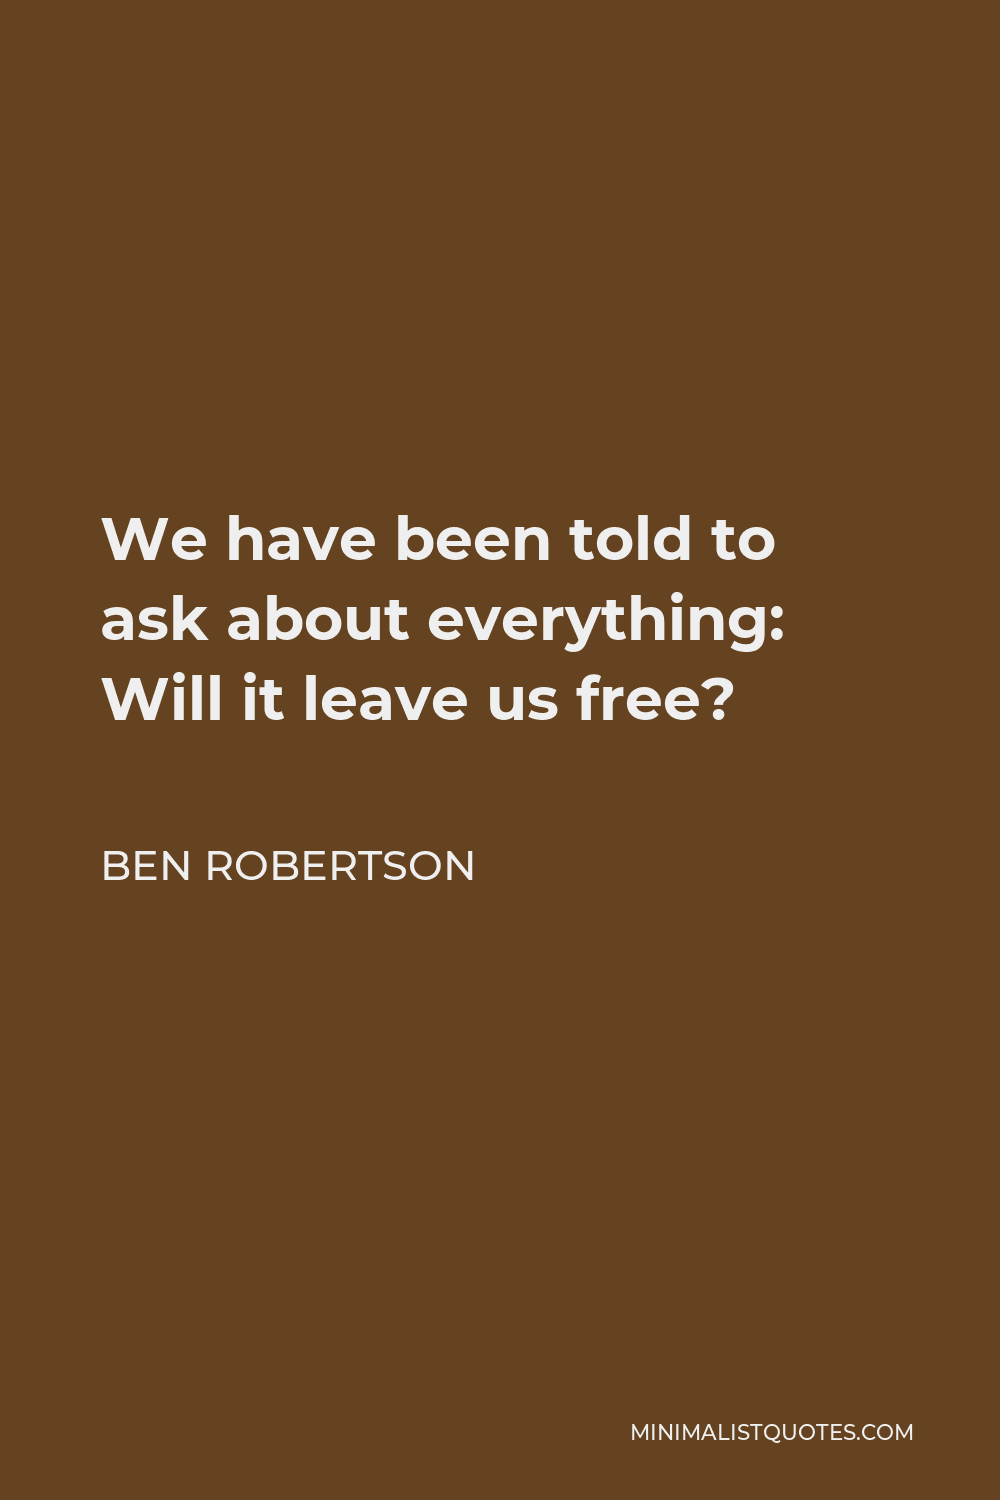 Ben Robertson Quote - We have been told to ask about everything: Will it leave us free?